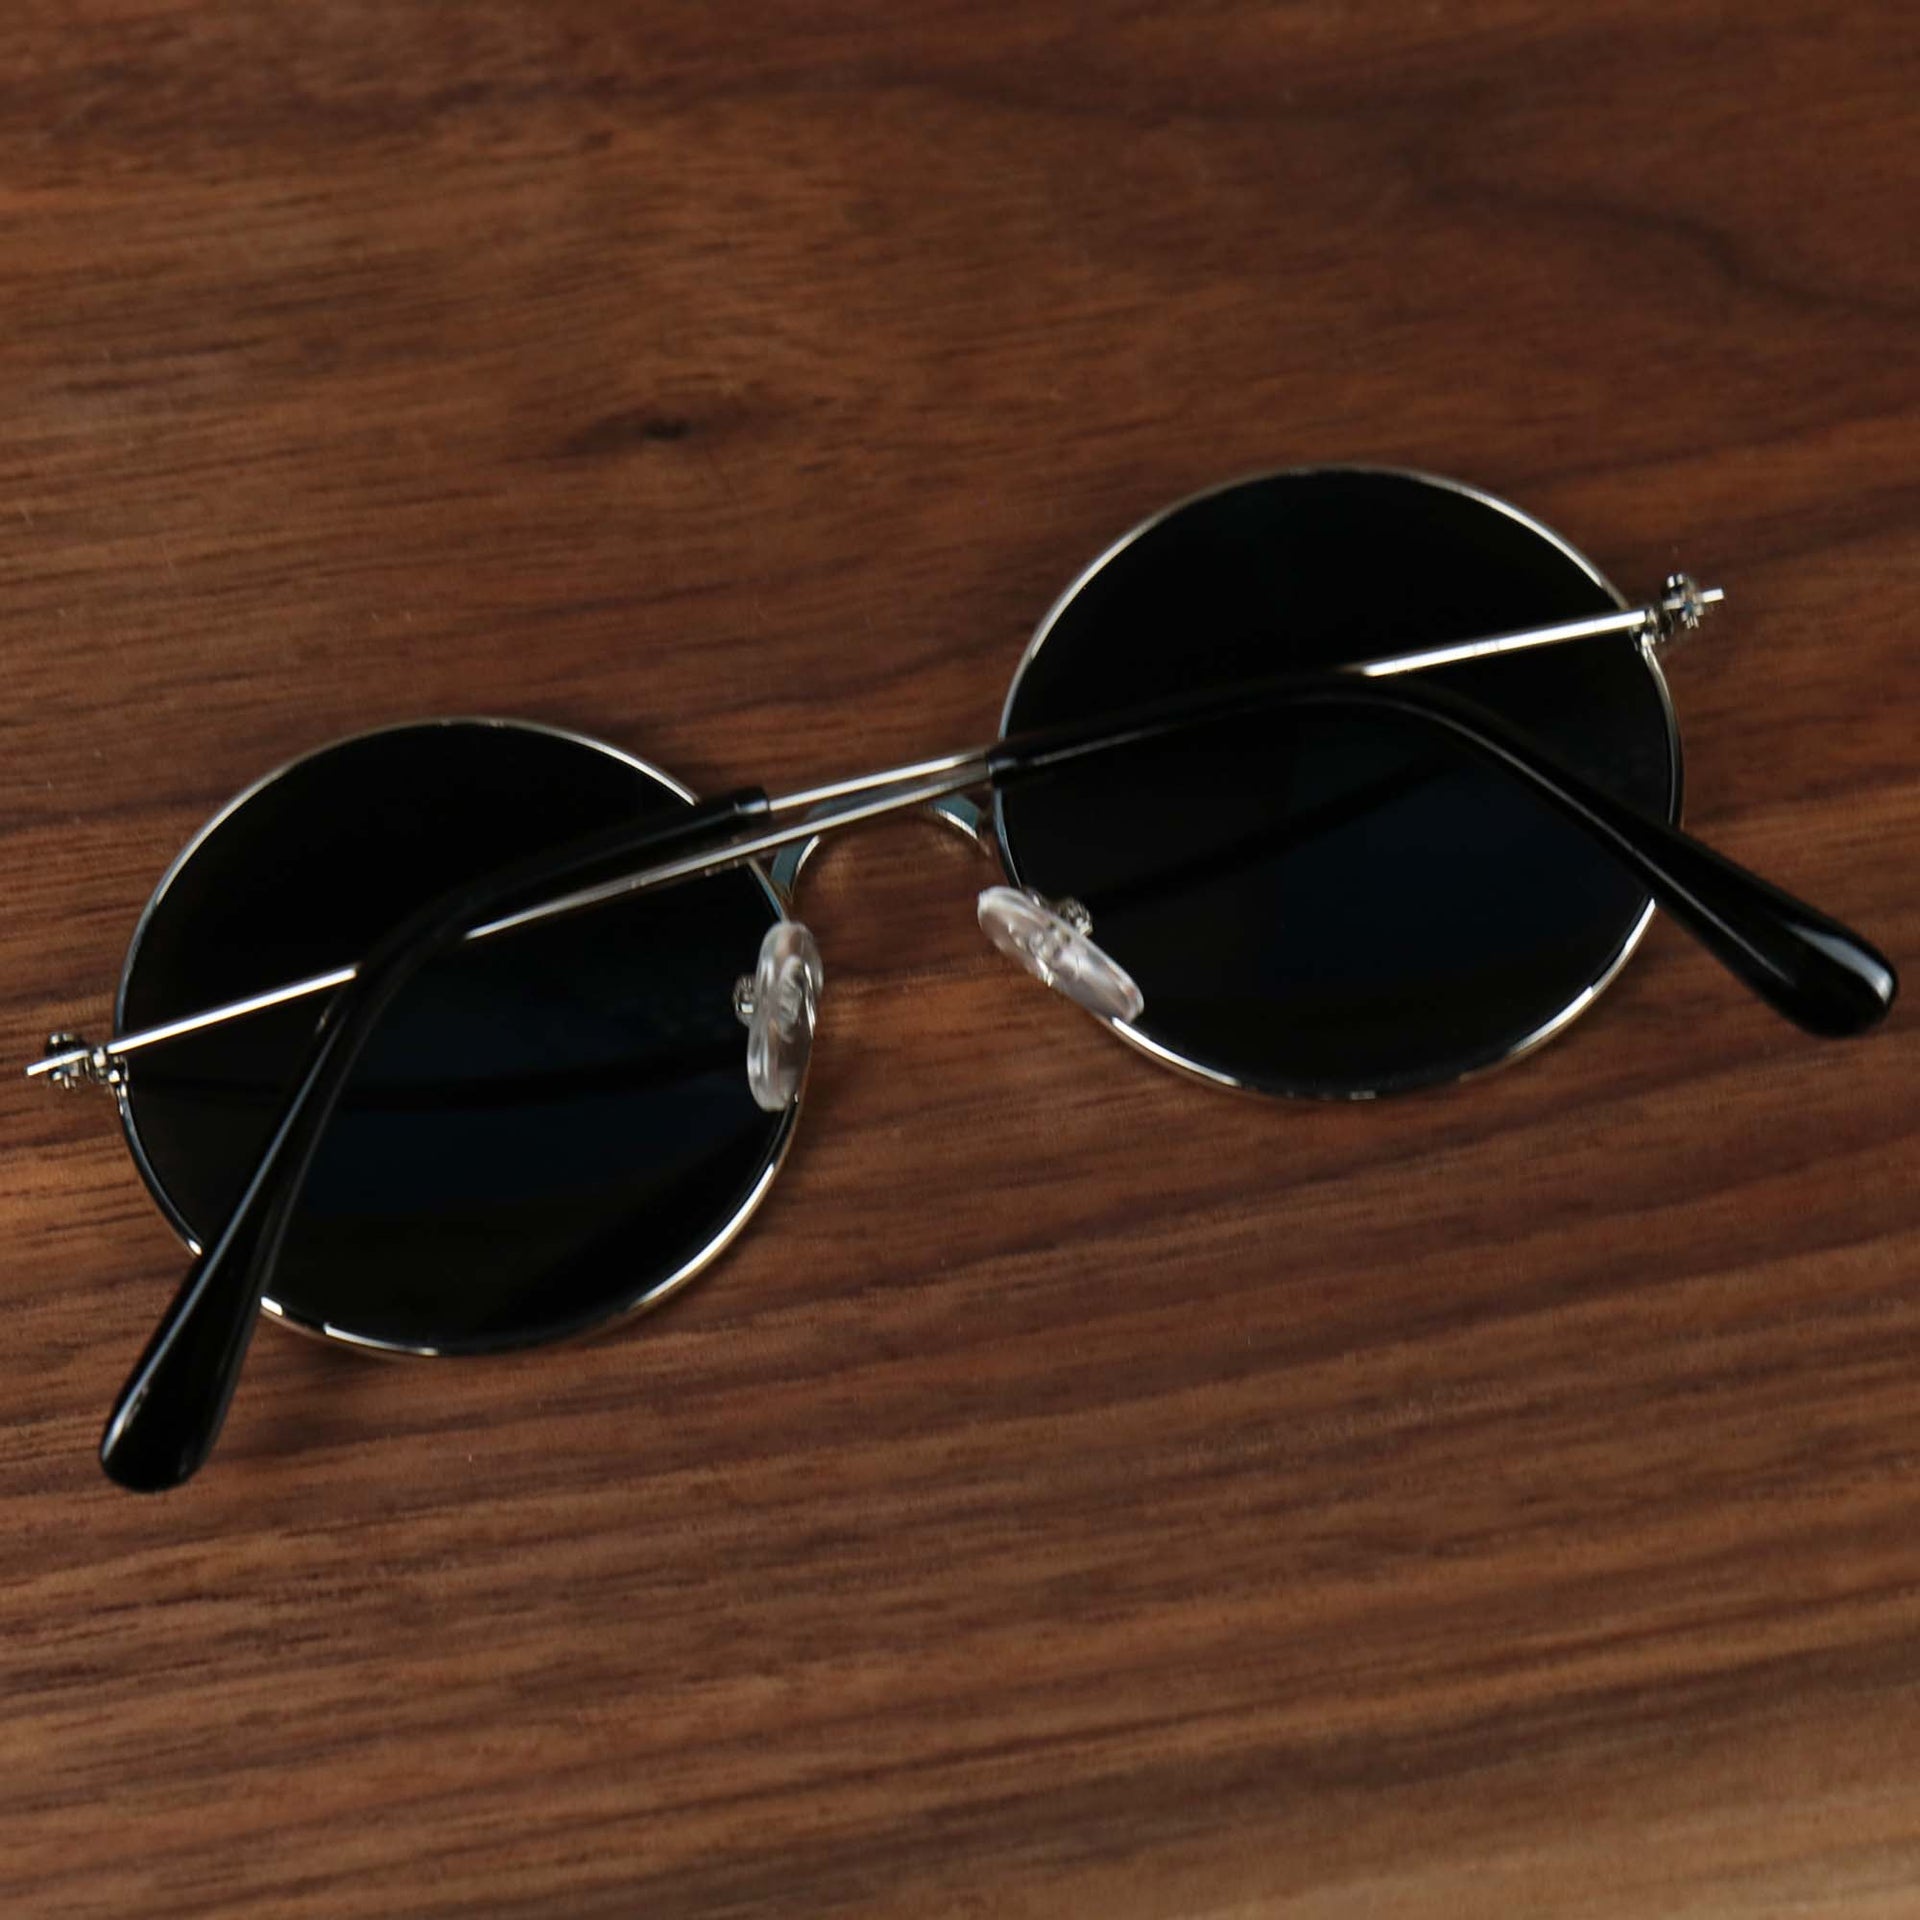 The Youth Round Frame Black Lens Sunglasses with Silver Frame folded up